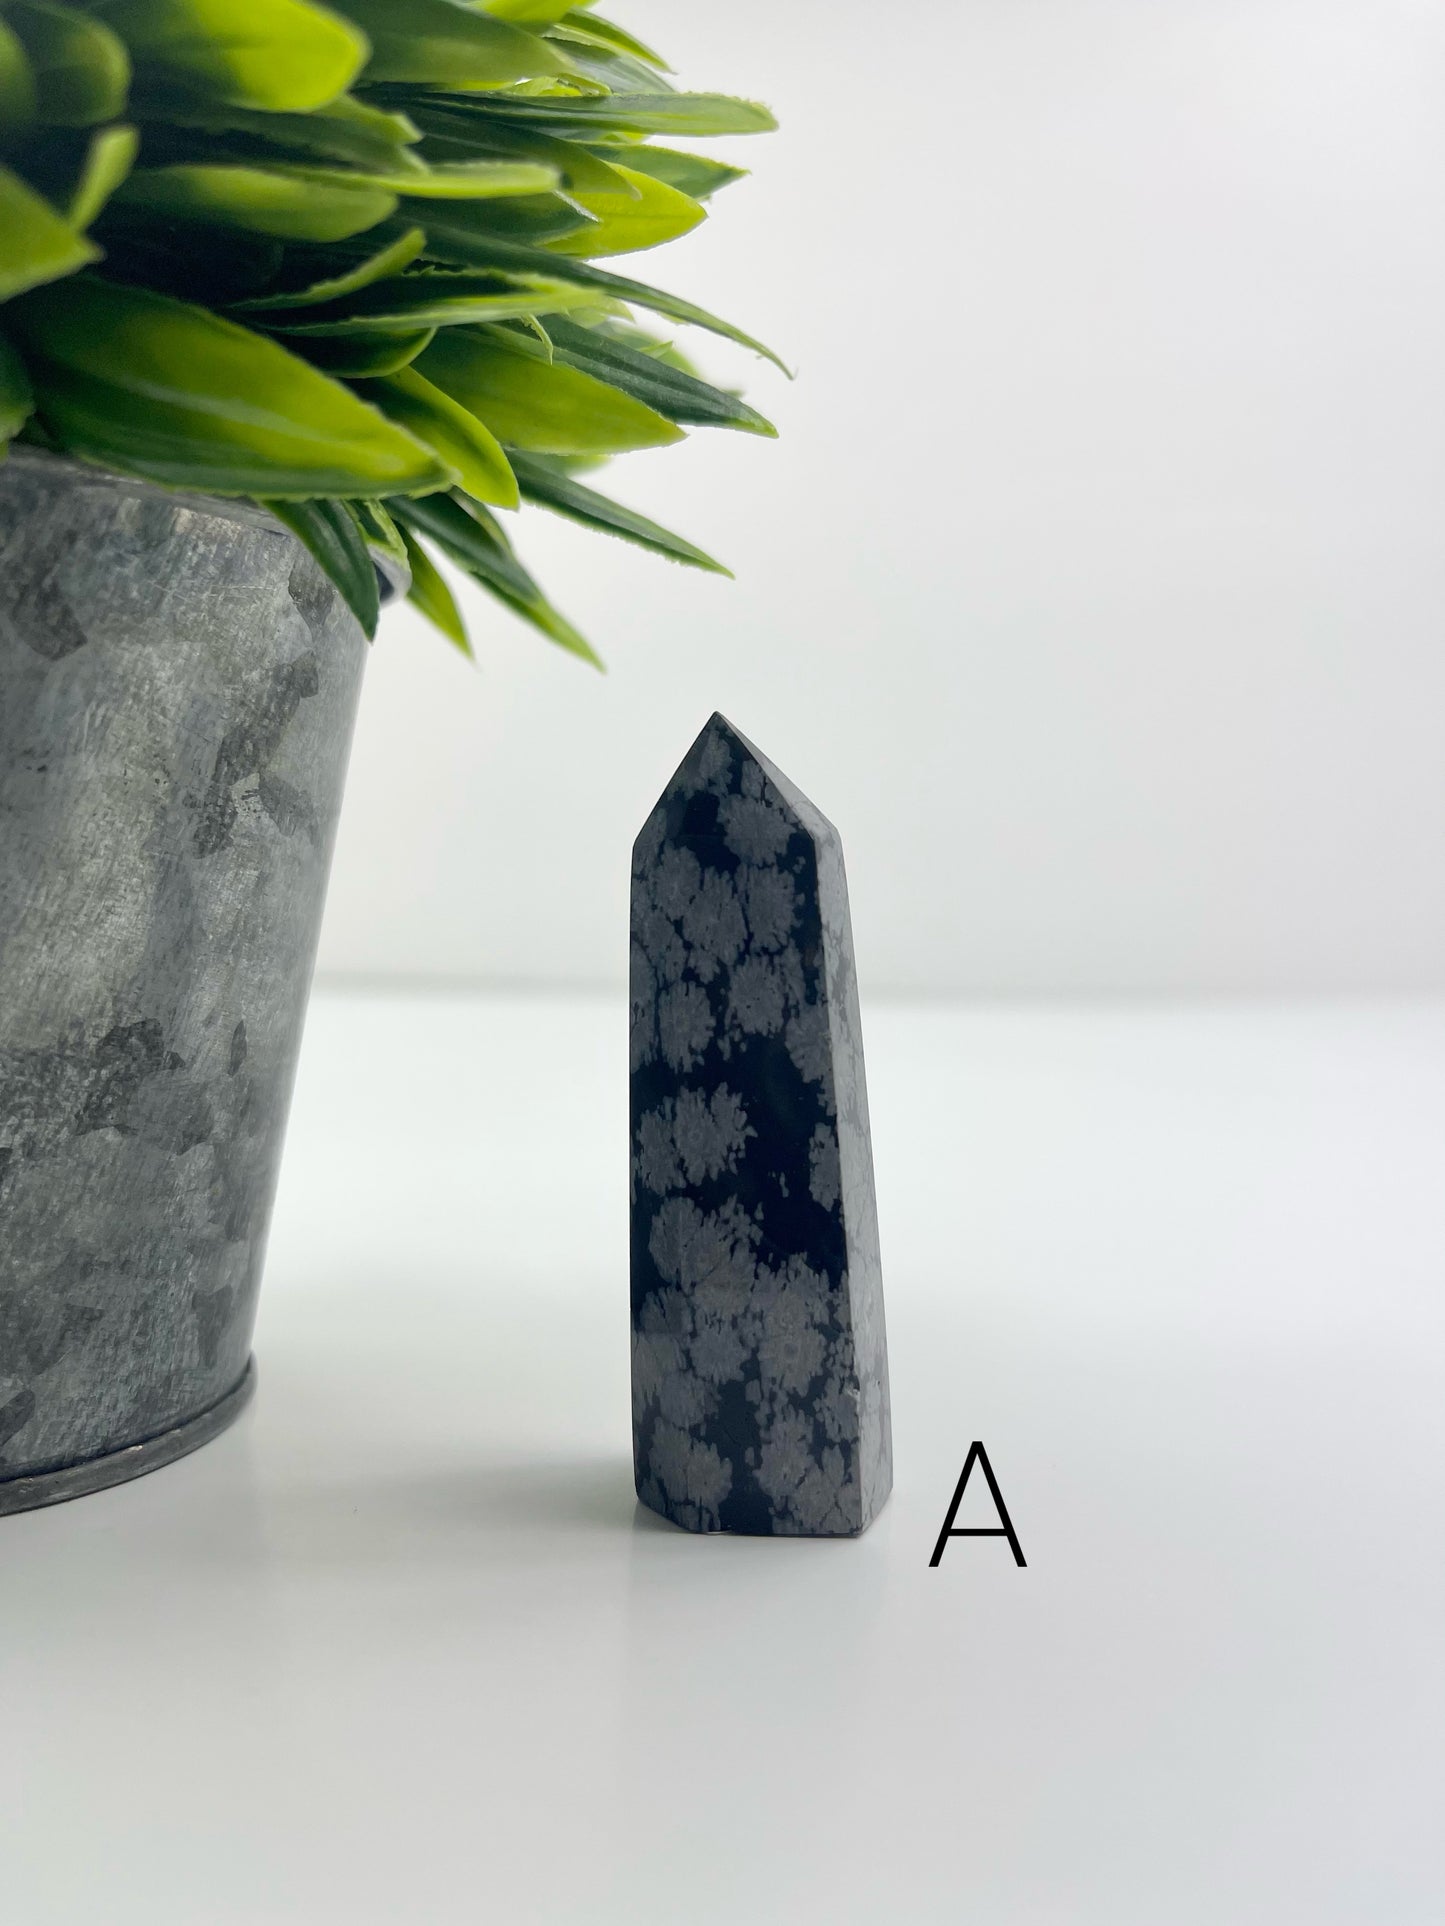 Snowflake Obsidian Tower A